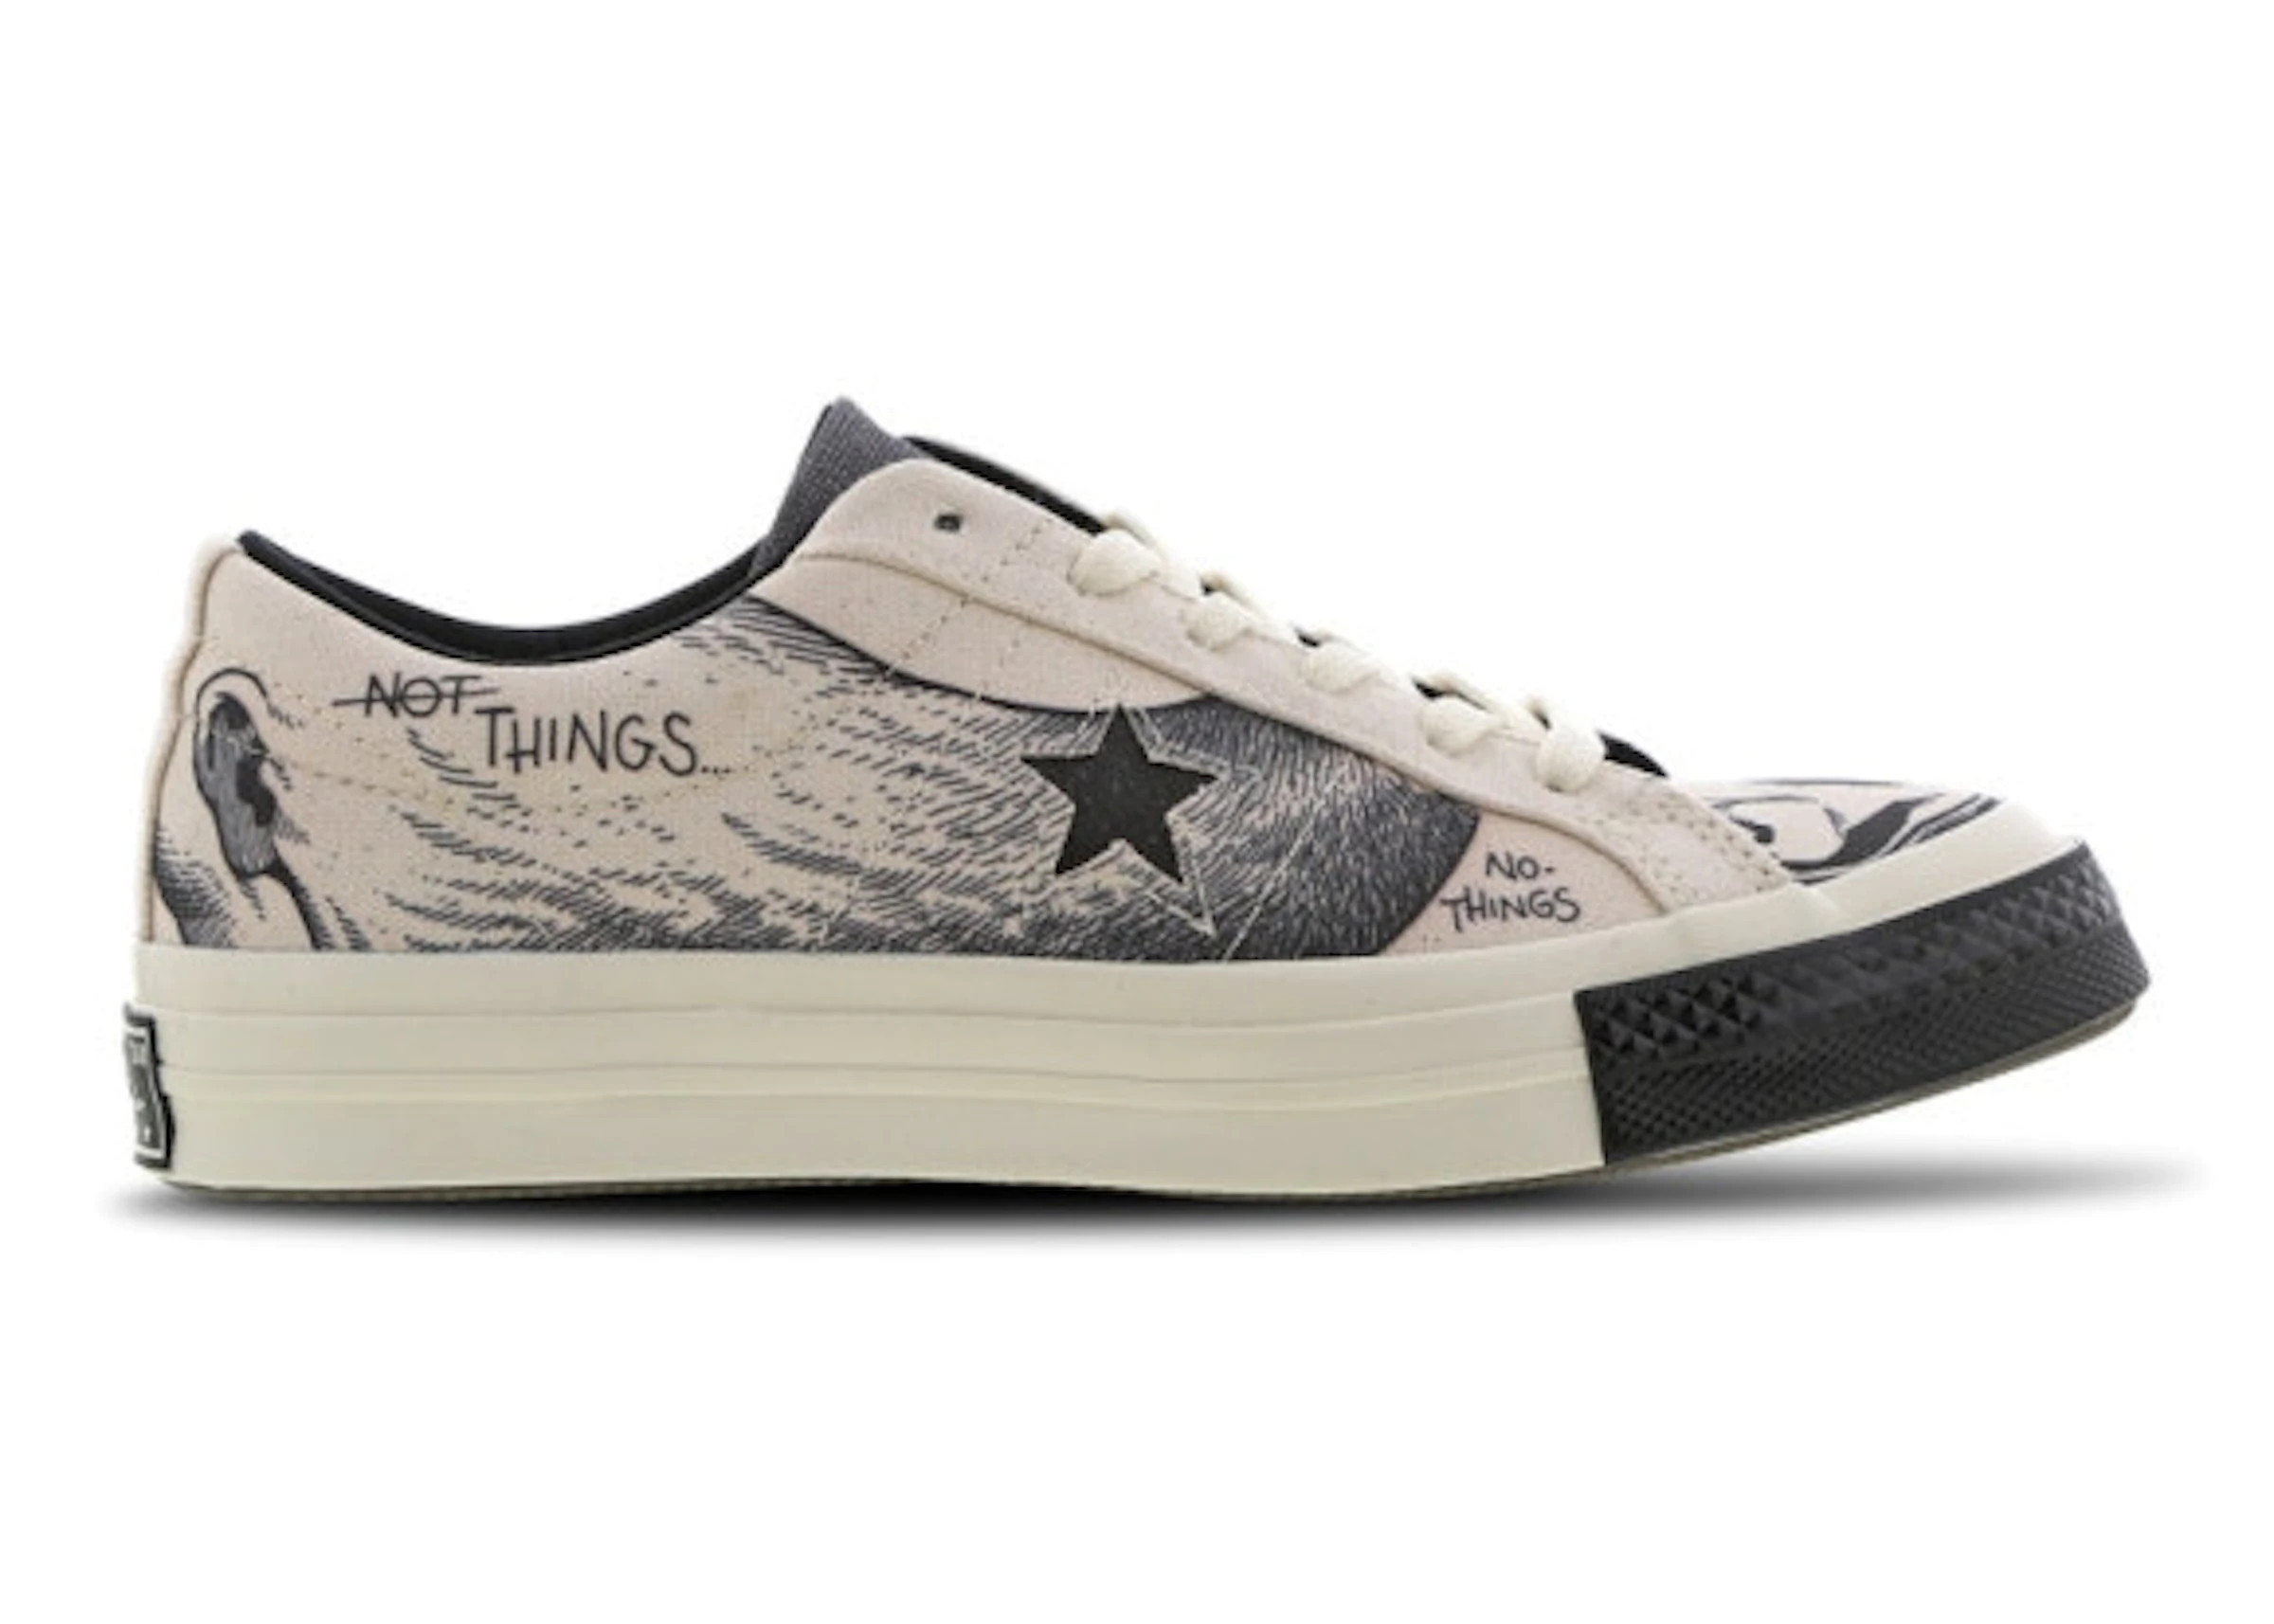 Converse One Star Ox Tyler the Creator Sail - 164533c - US